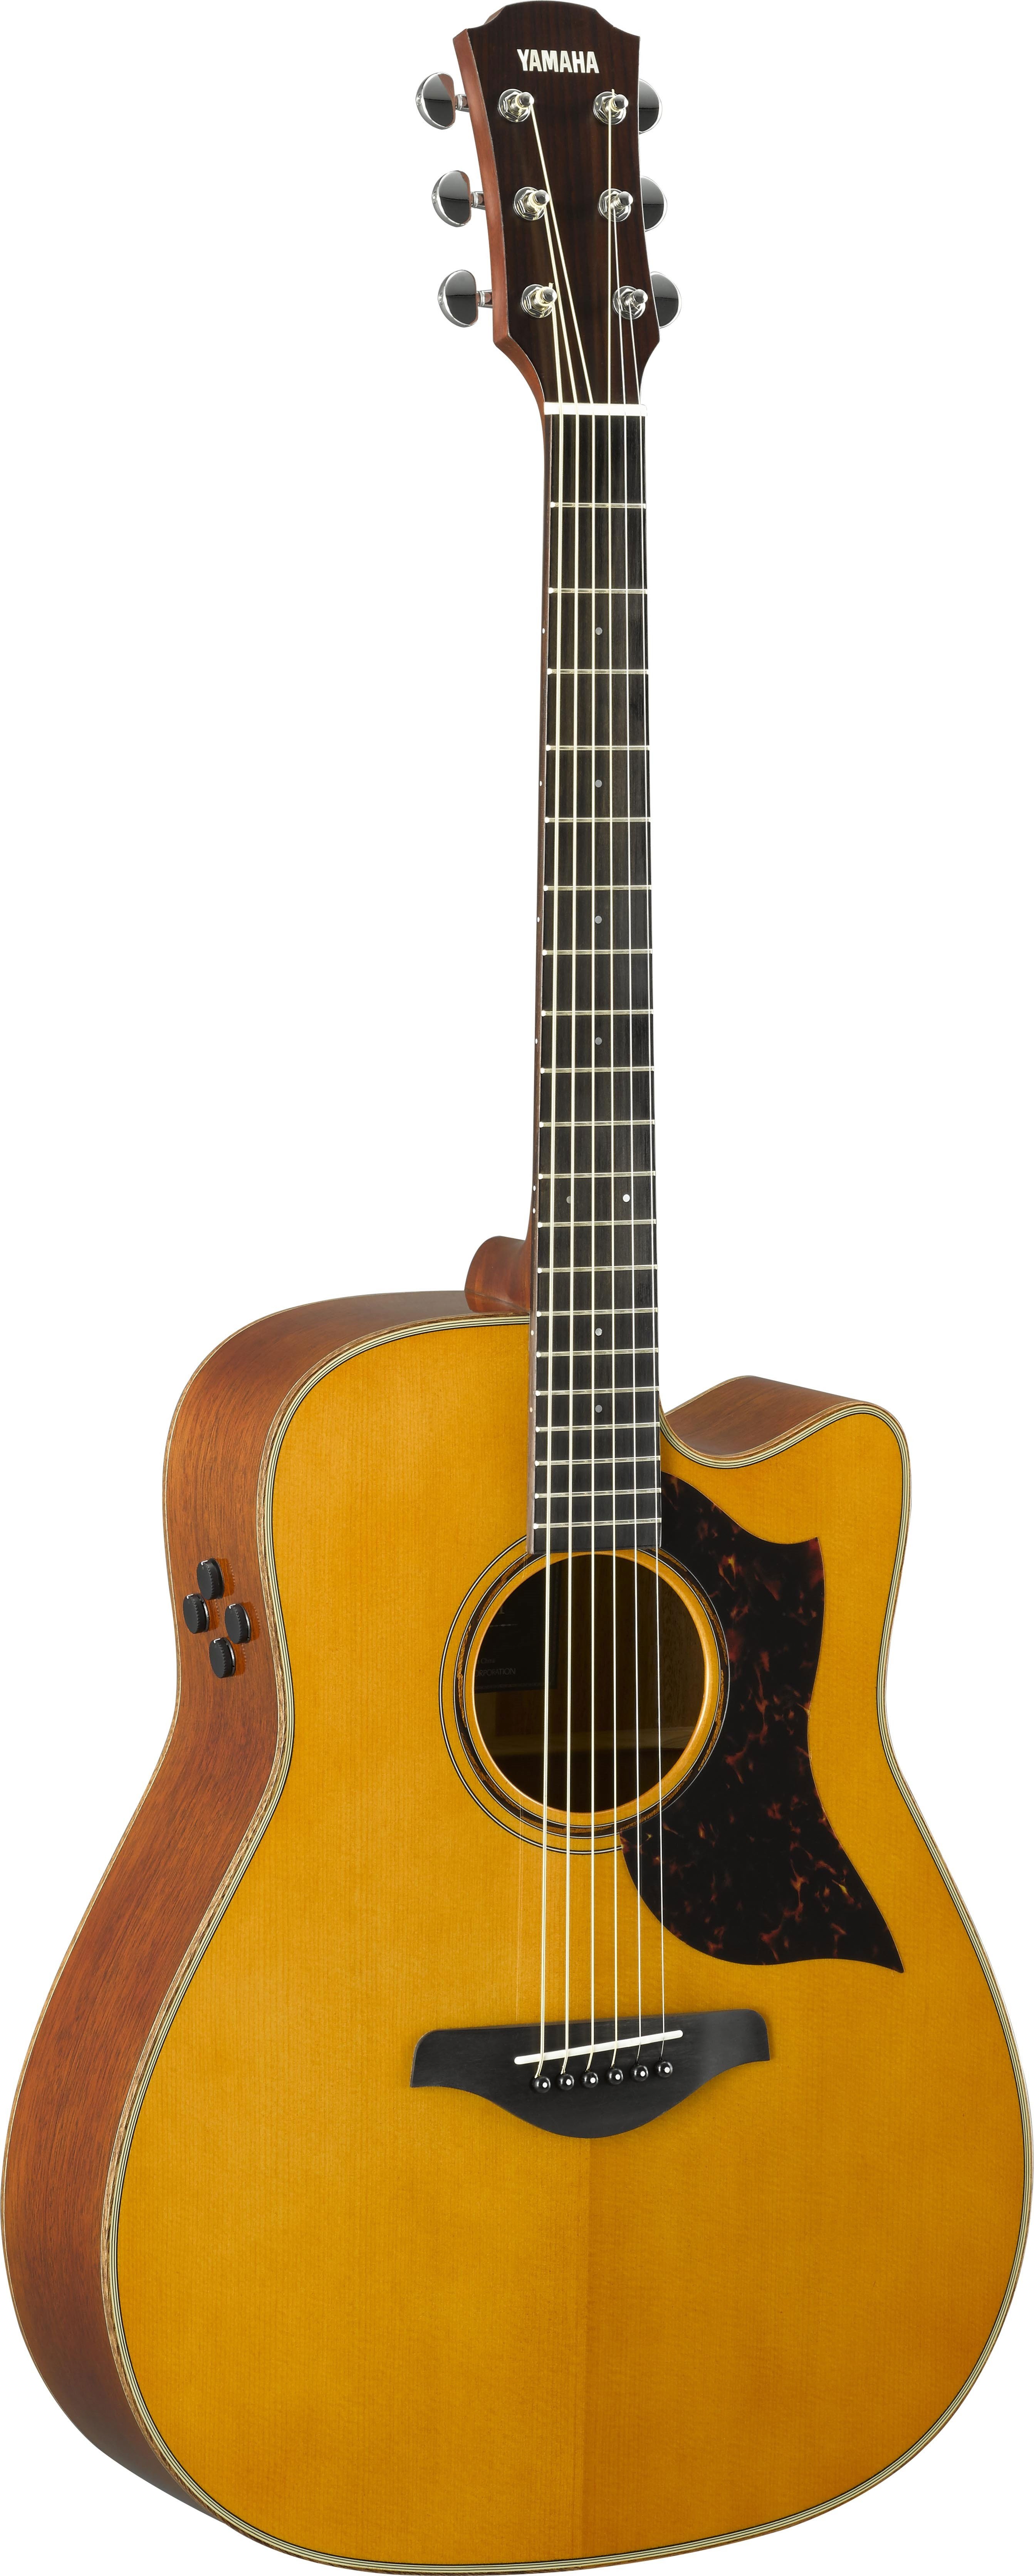 Yamaha A3M Dreadnought Cutaway - Natural Acoustic-Electric Guitar, Sitka Spruce Top, Solid Mahogany Back and Sides for sale